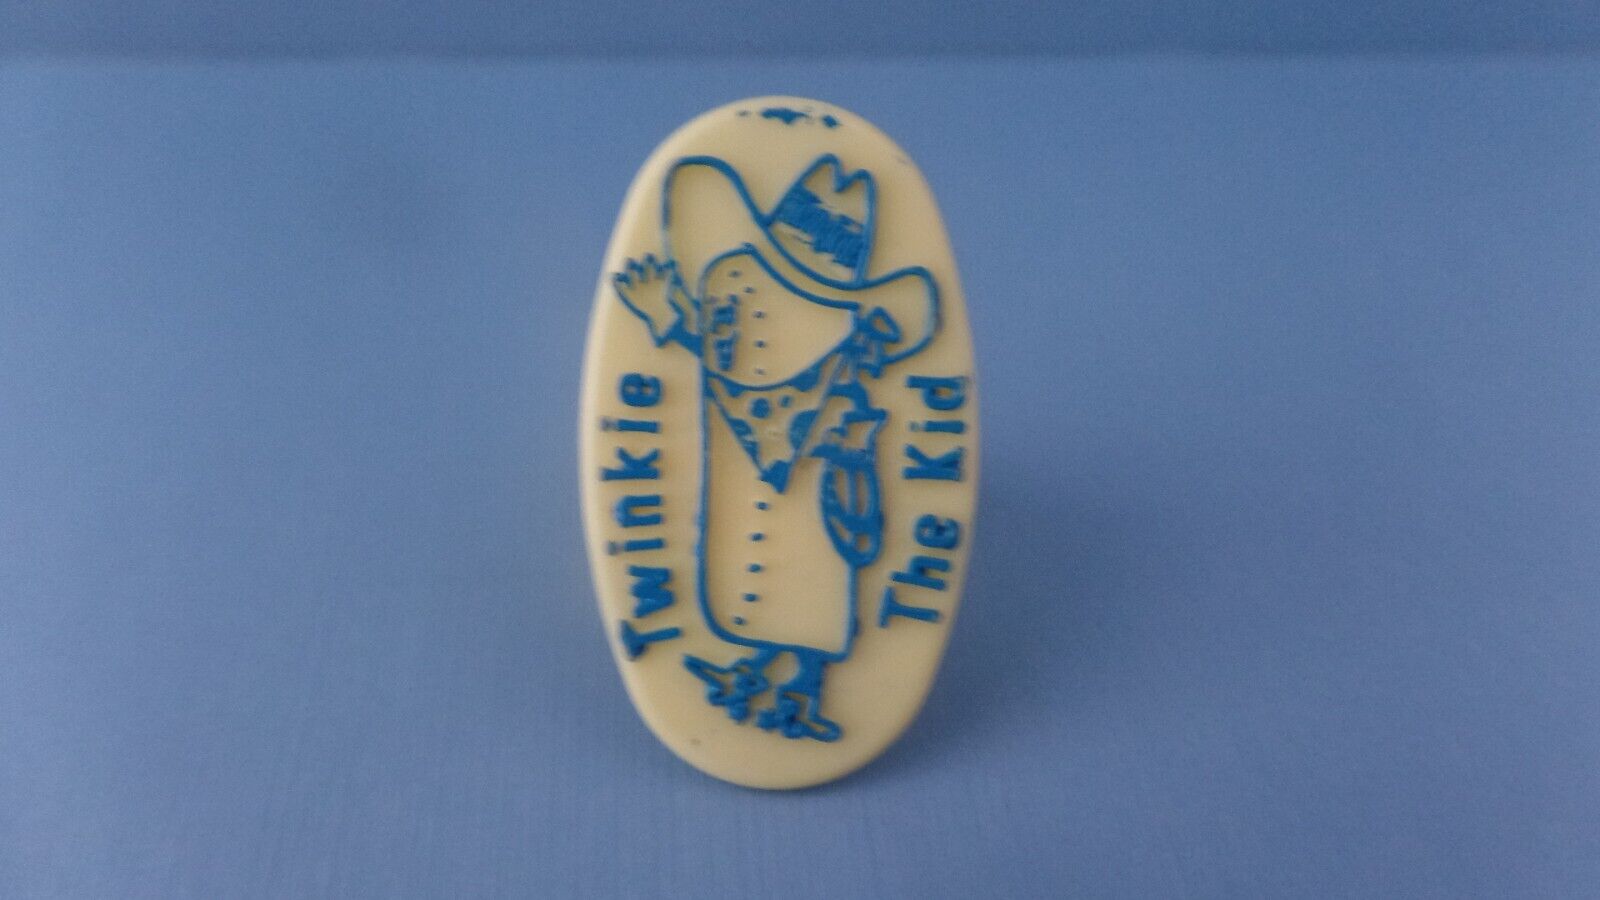 Vintage Advertising Twinkie The Kid Plastic Ring 1970s Hostess Promotional Prize